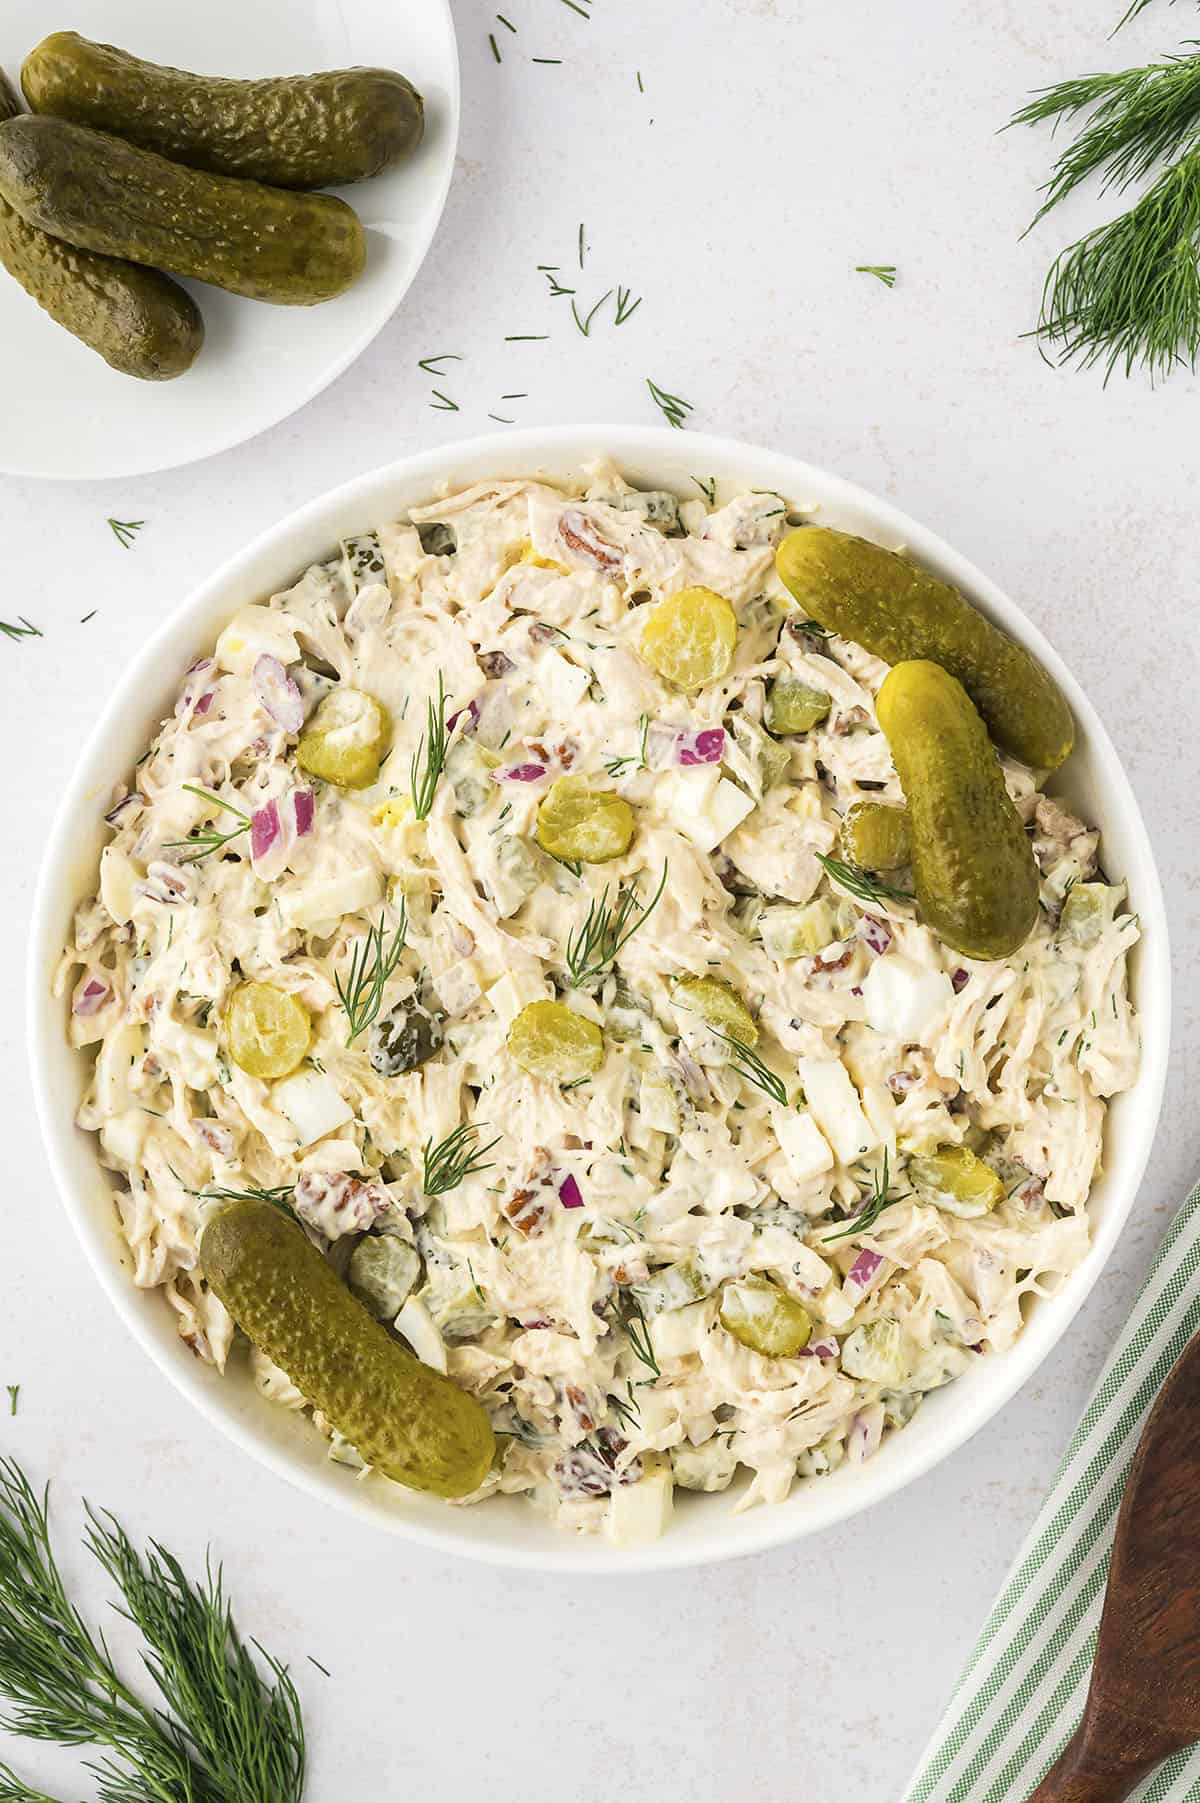 Chicken salad topped with dill pickles in white bowl.